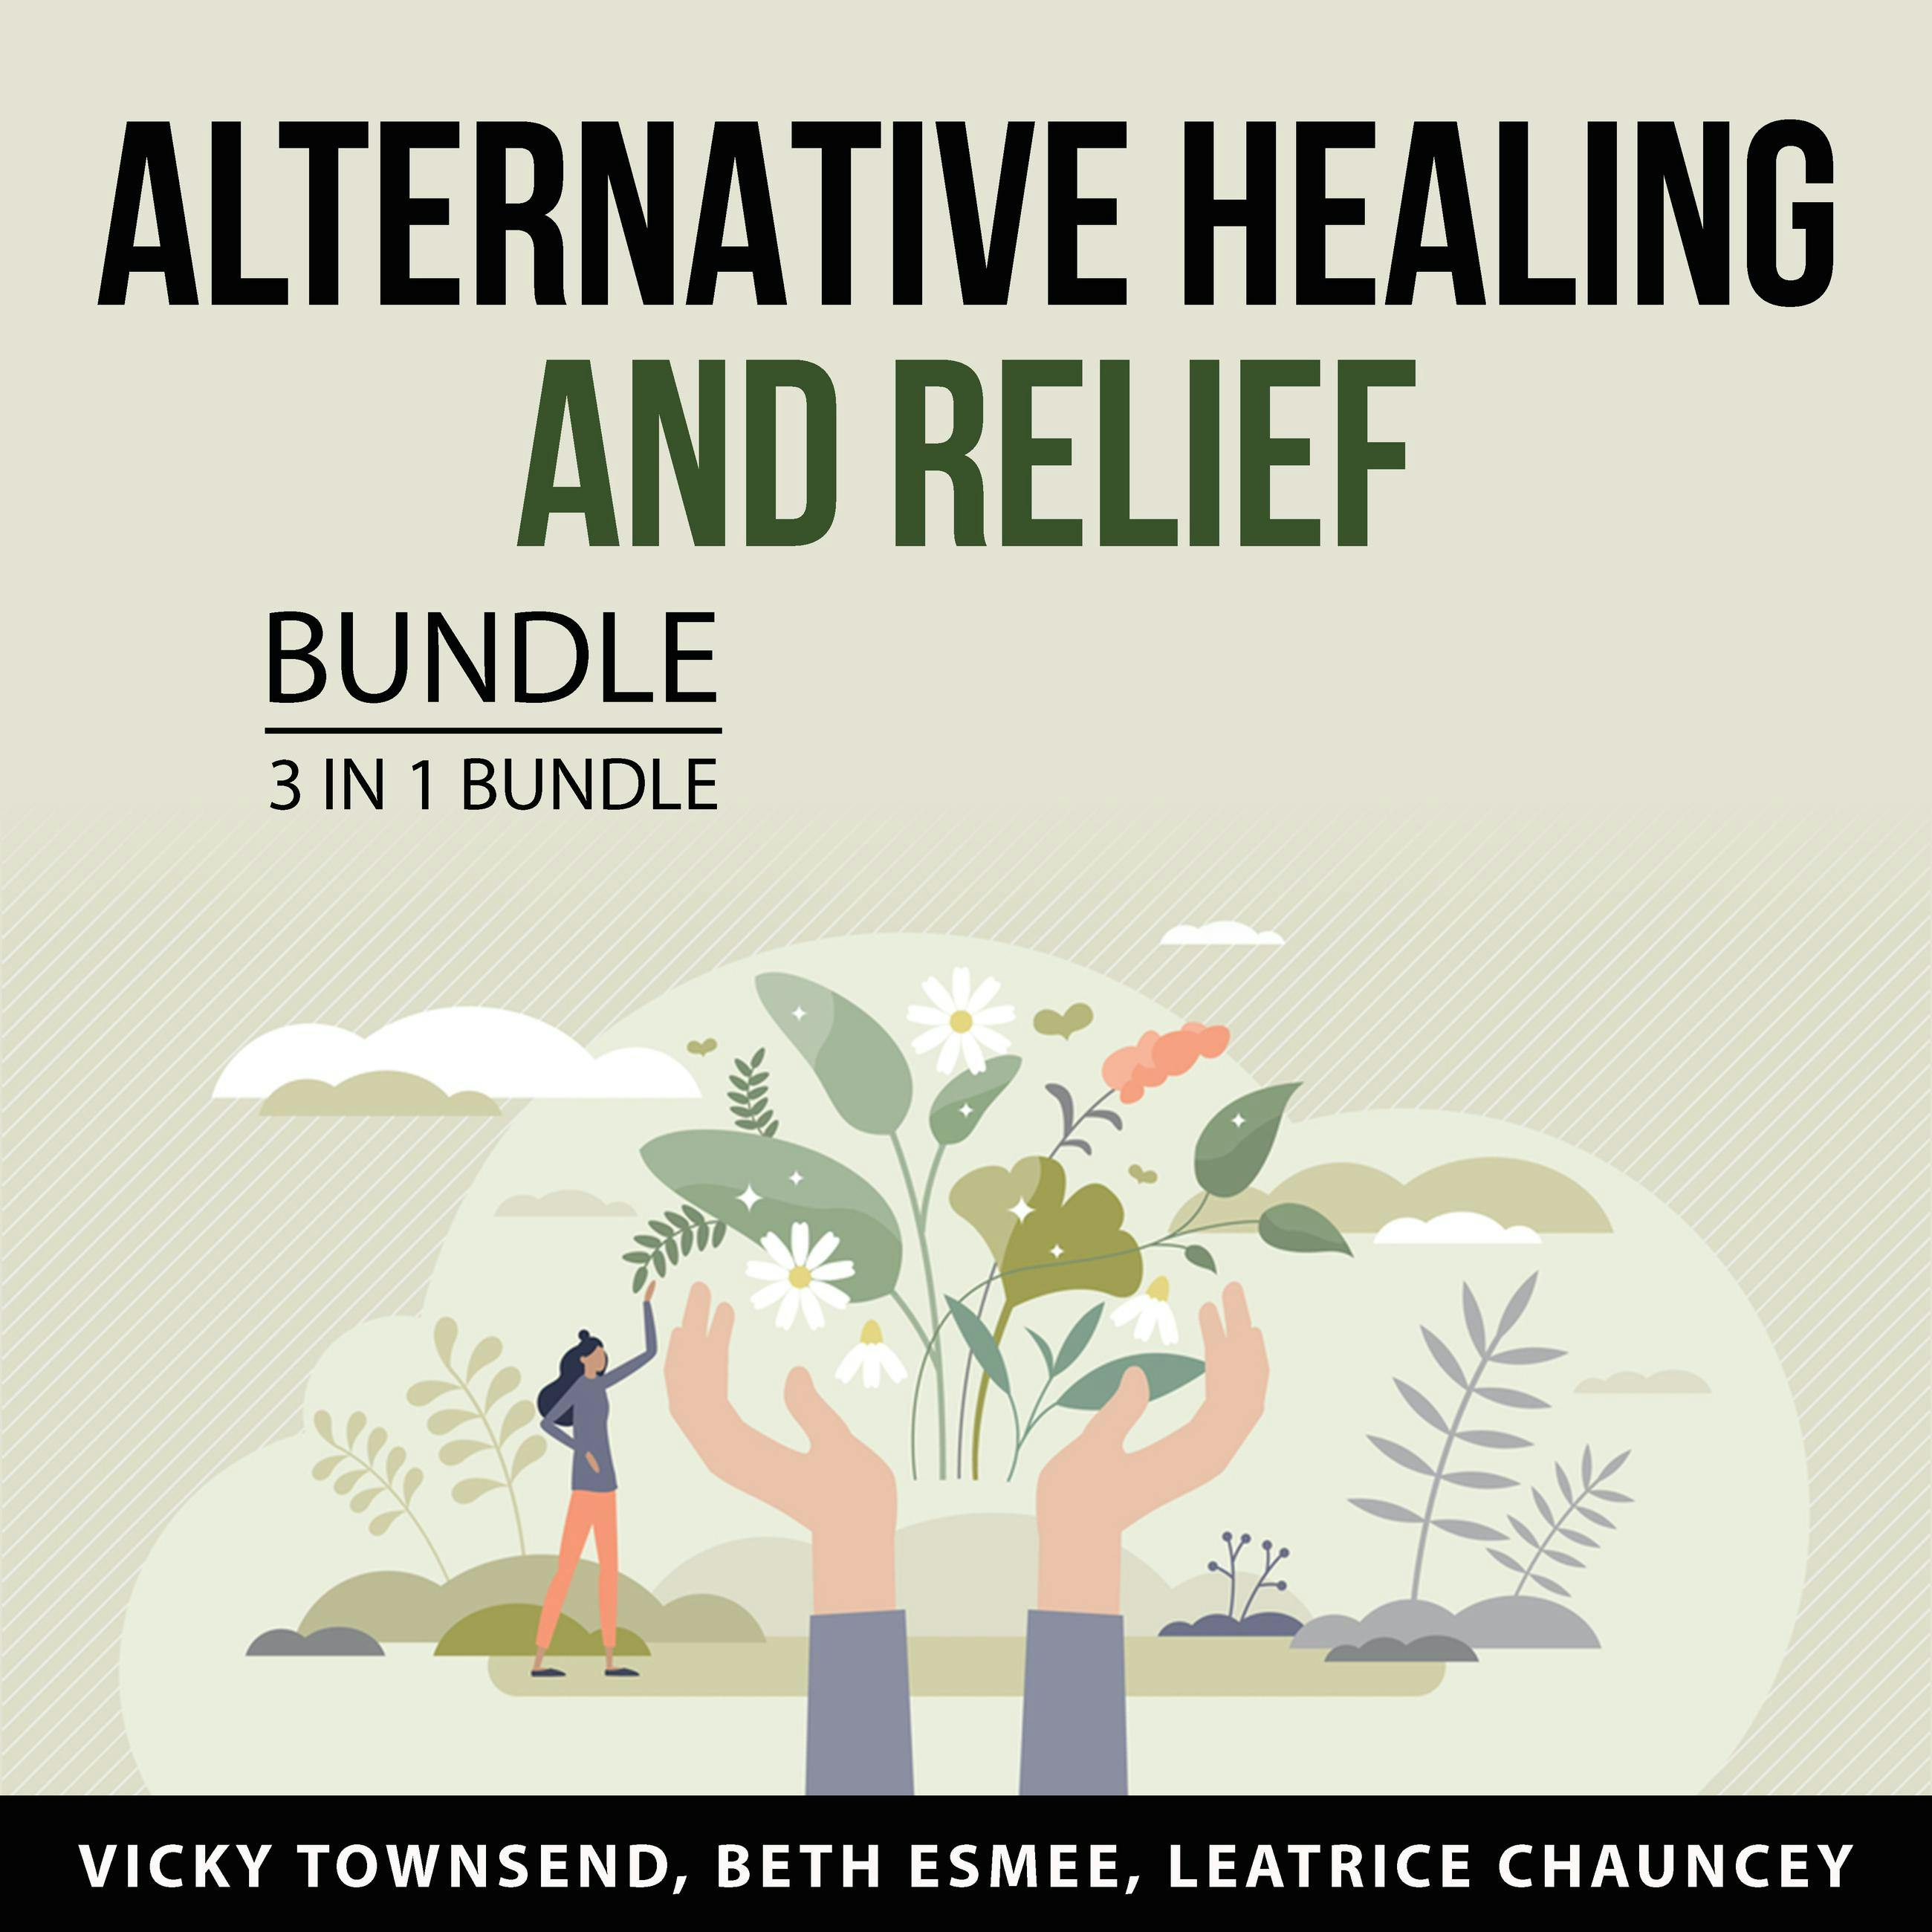 Alternative Healing and Relief Bundle, 3 in 1 Bundle: Medicinal Plants Handbook, Healing Through Medicinal Herbs, and Aromatherapy and Essential Oils for Healing - undefined